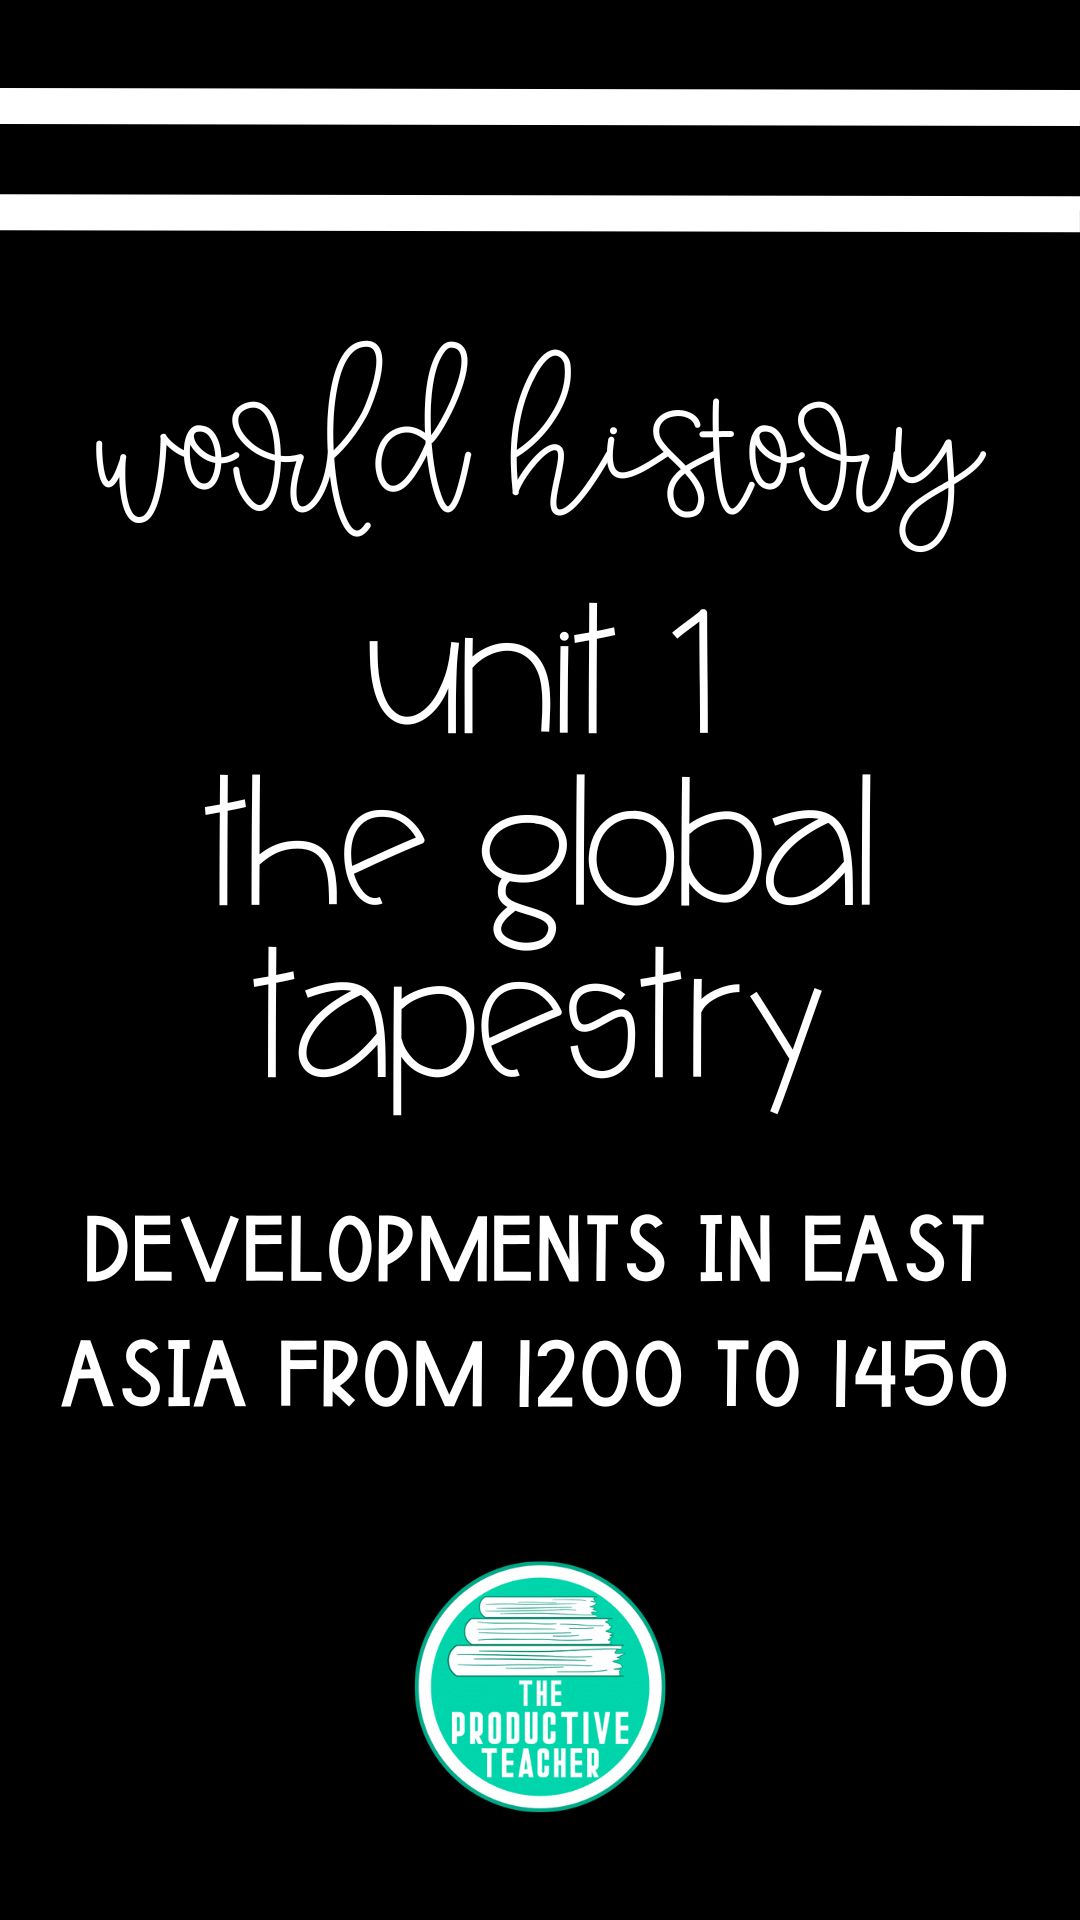 Developments in East Asia from 1200 to 1450